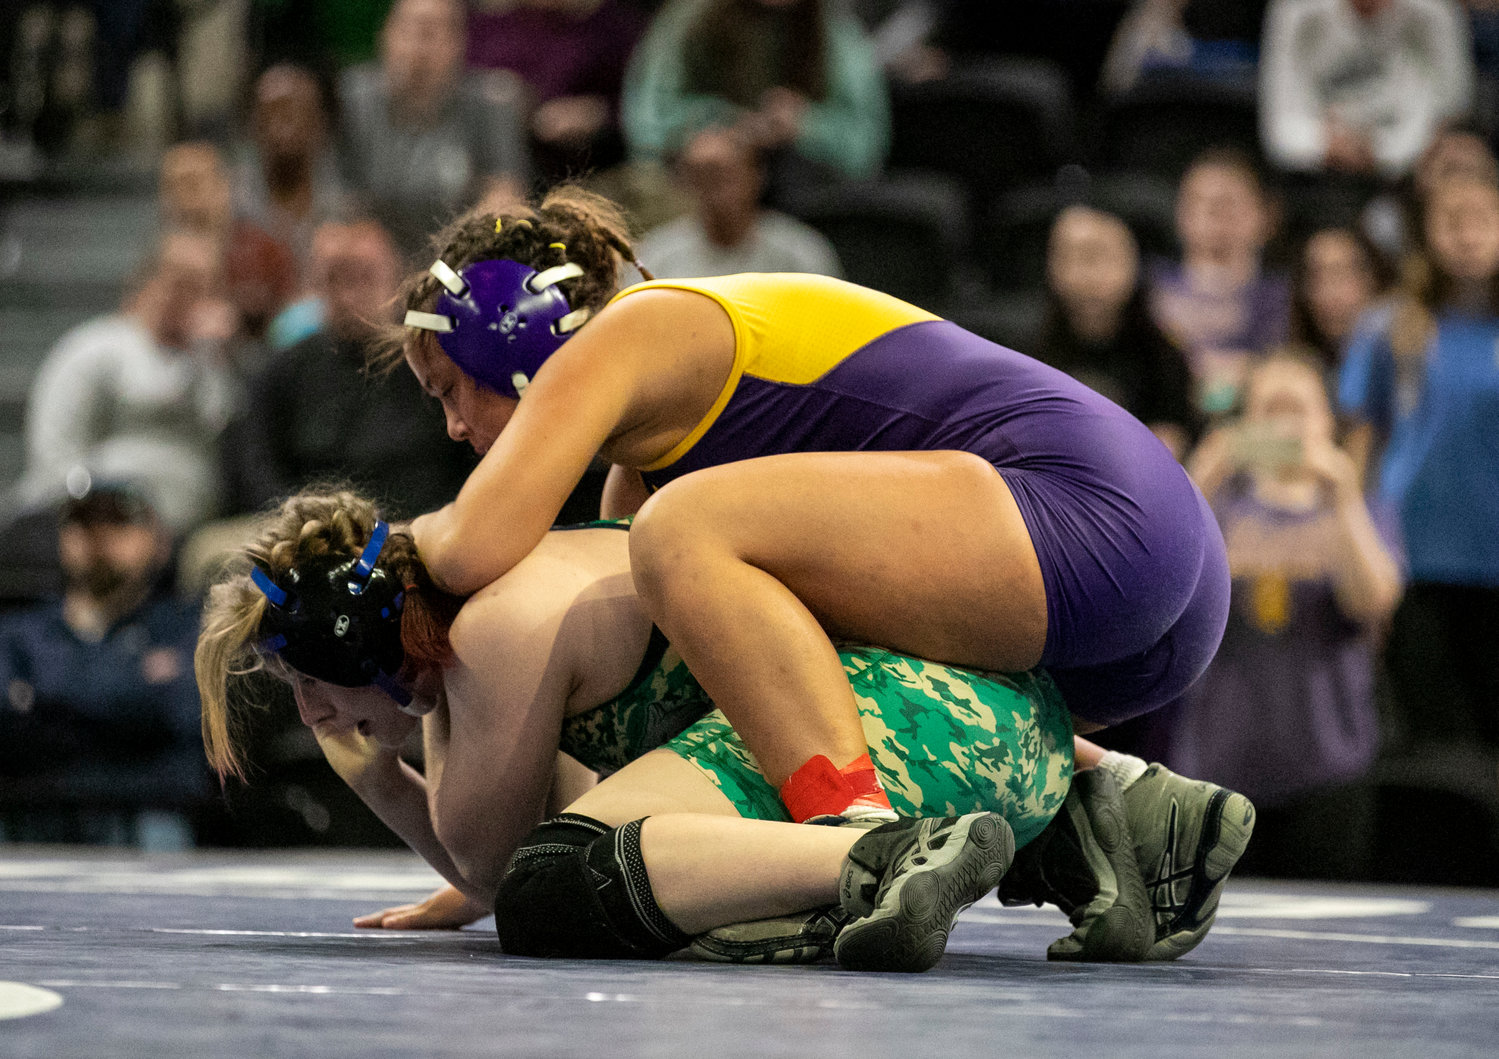 Daphne senior Kalee Holder works over Enterprise’s Mackenzie Schultz during the state final match at Bill Harris Arena in Birmingham Friday afternoon. The Lady Trojans’ 165-pounder earned a silver medal to help the squad take second in the team competition.